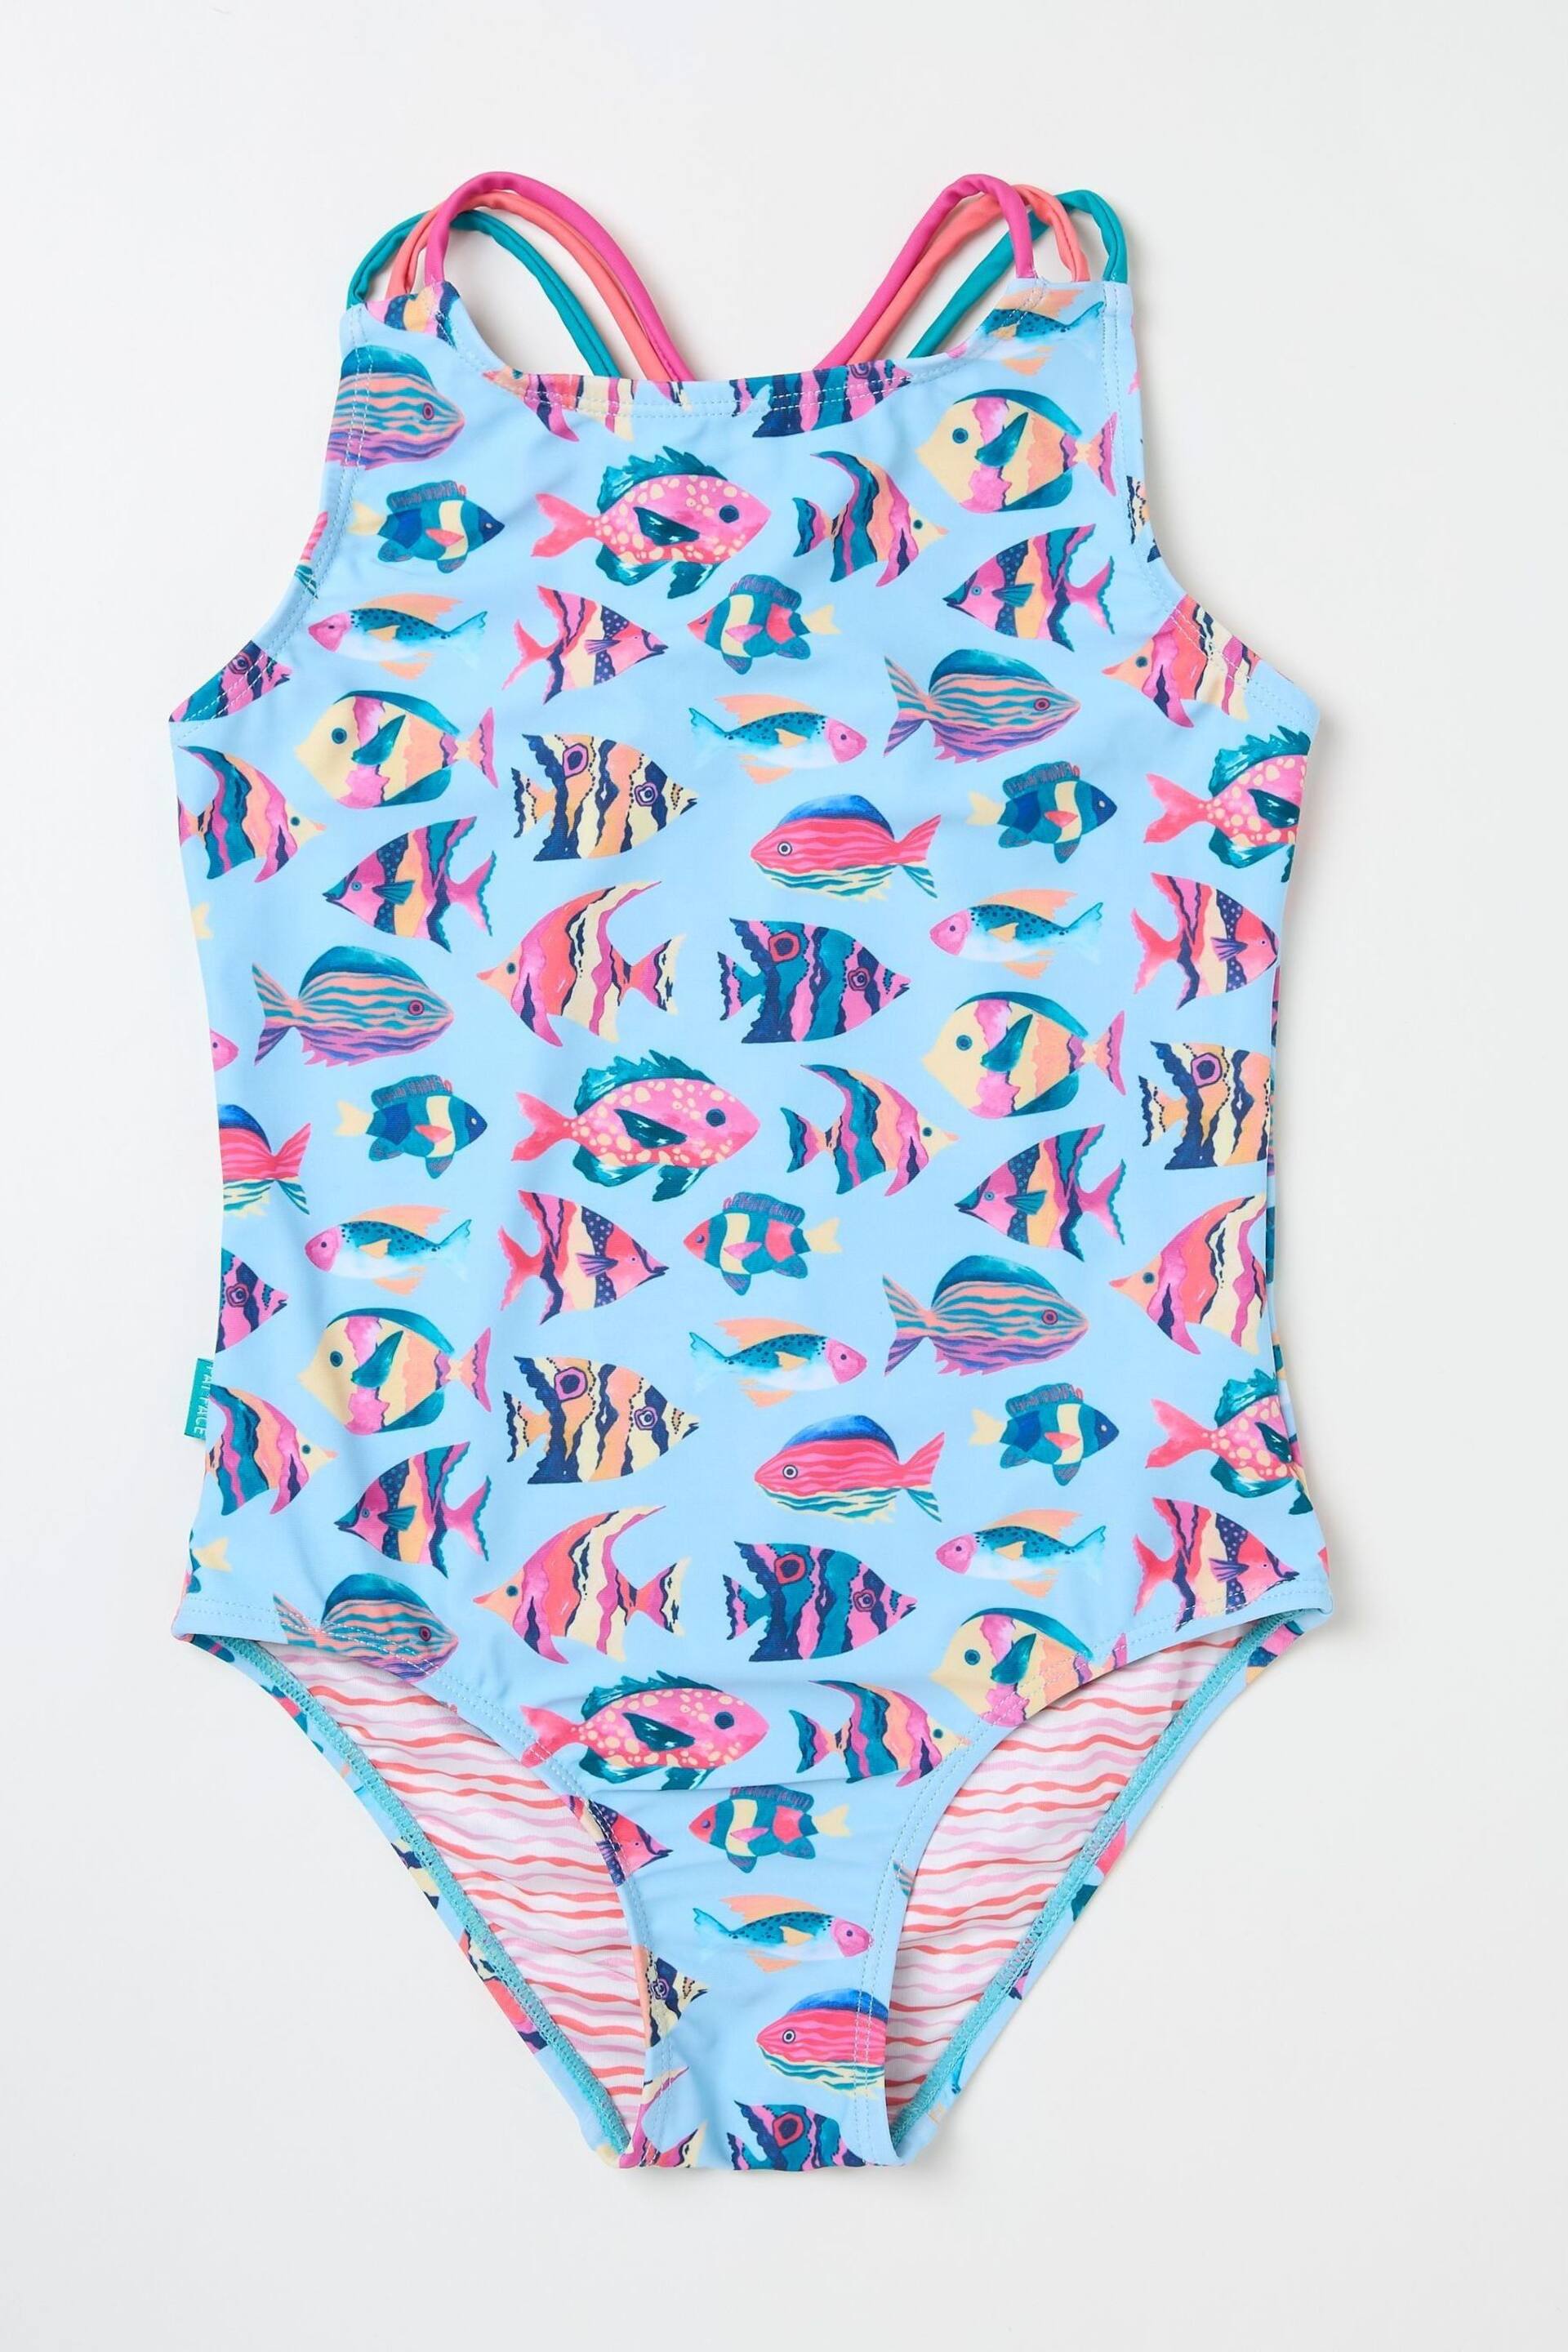 FatFace Blue Tropical Fish Swimsuit - Image 5 of 5